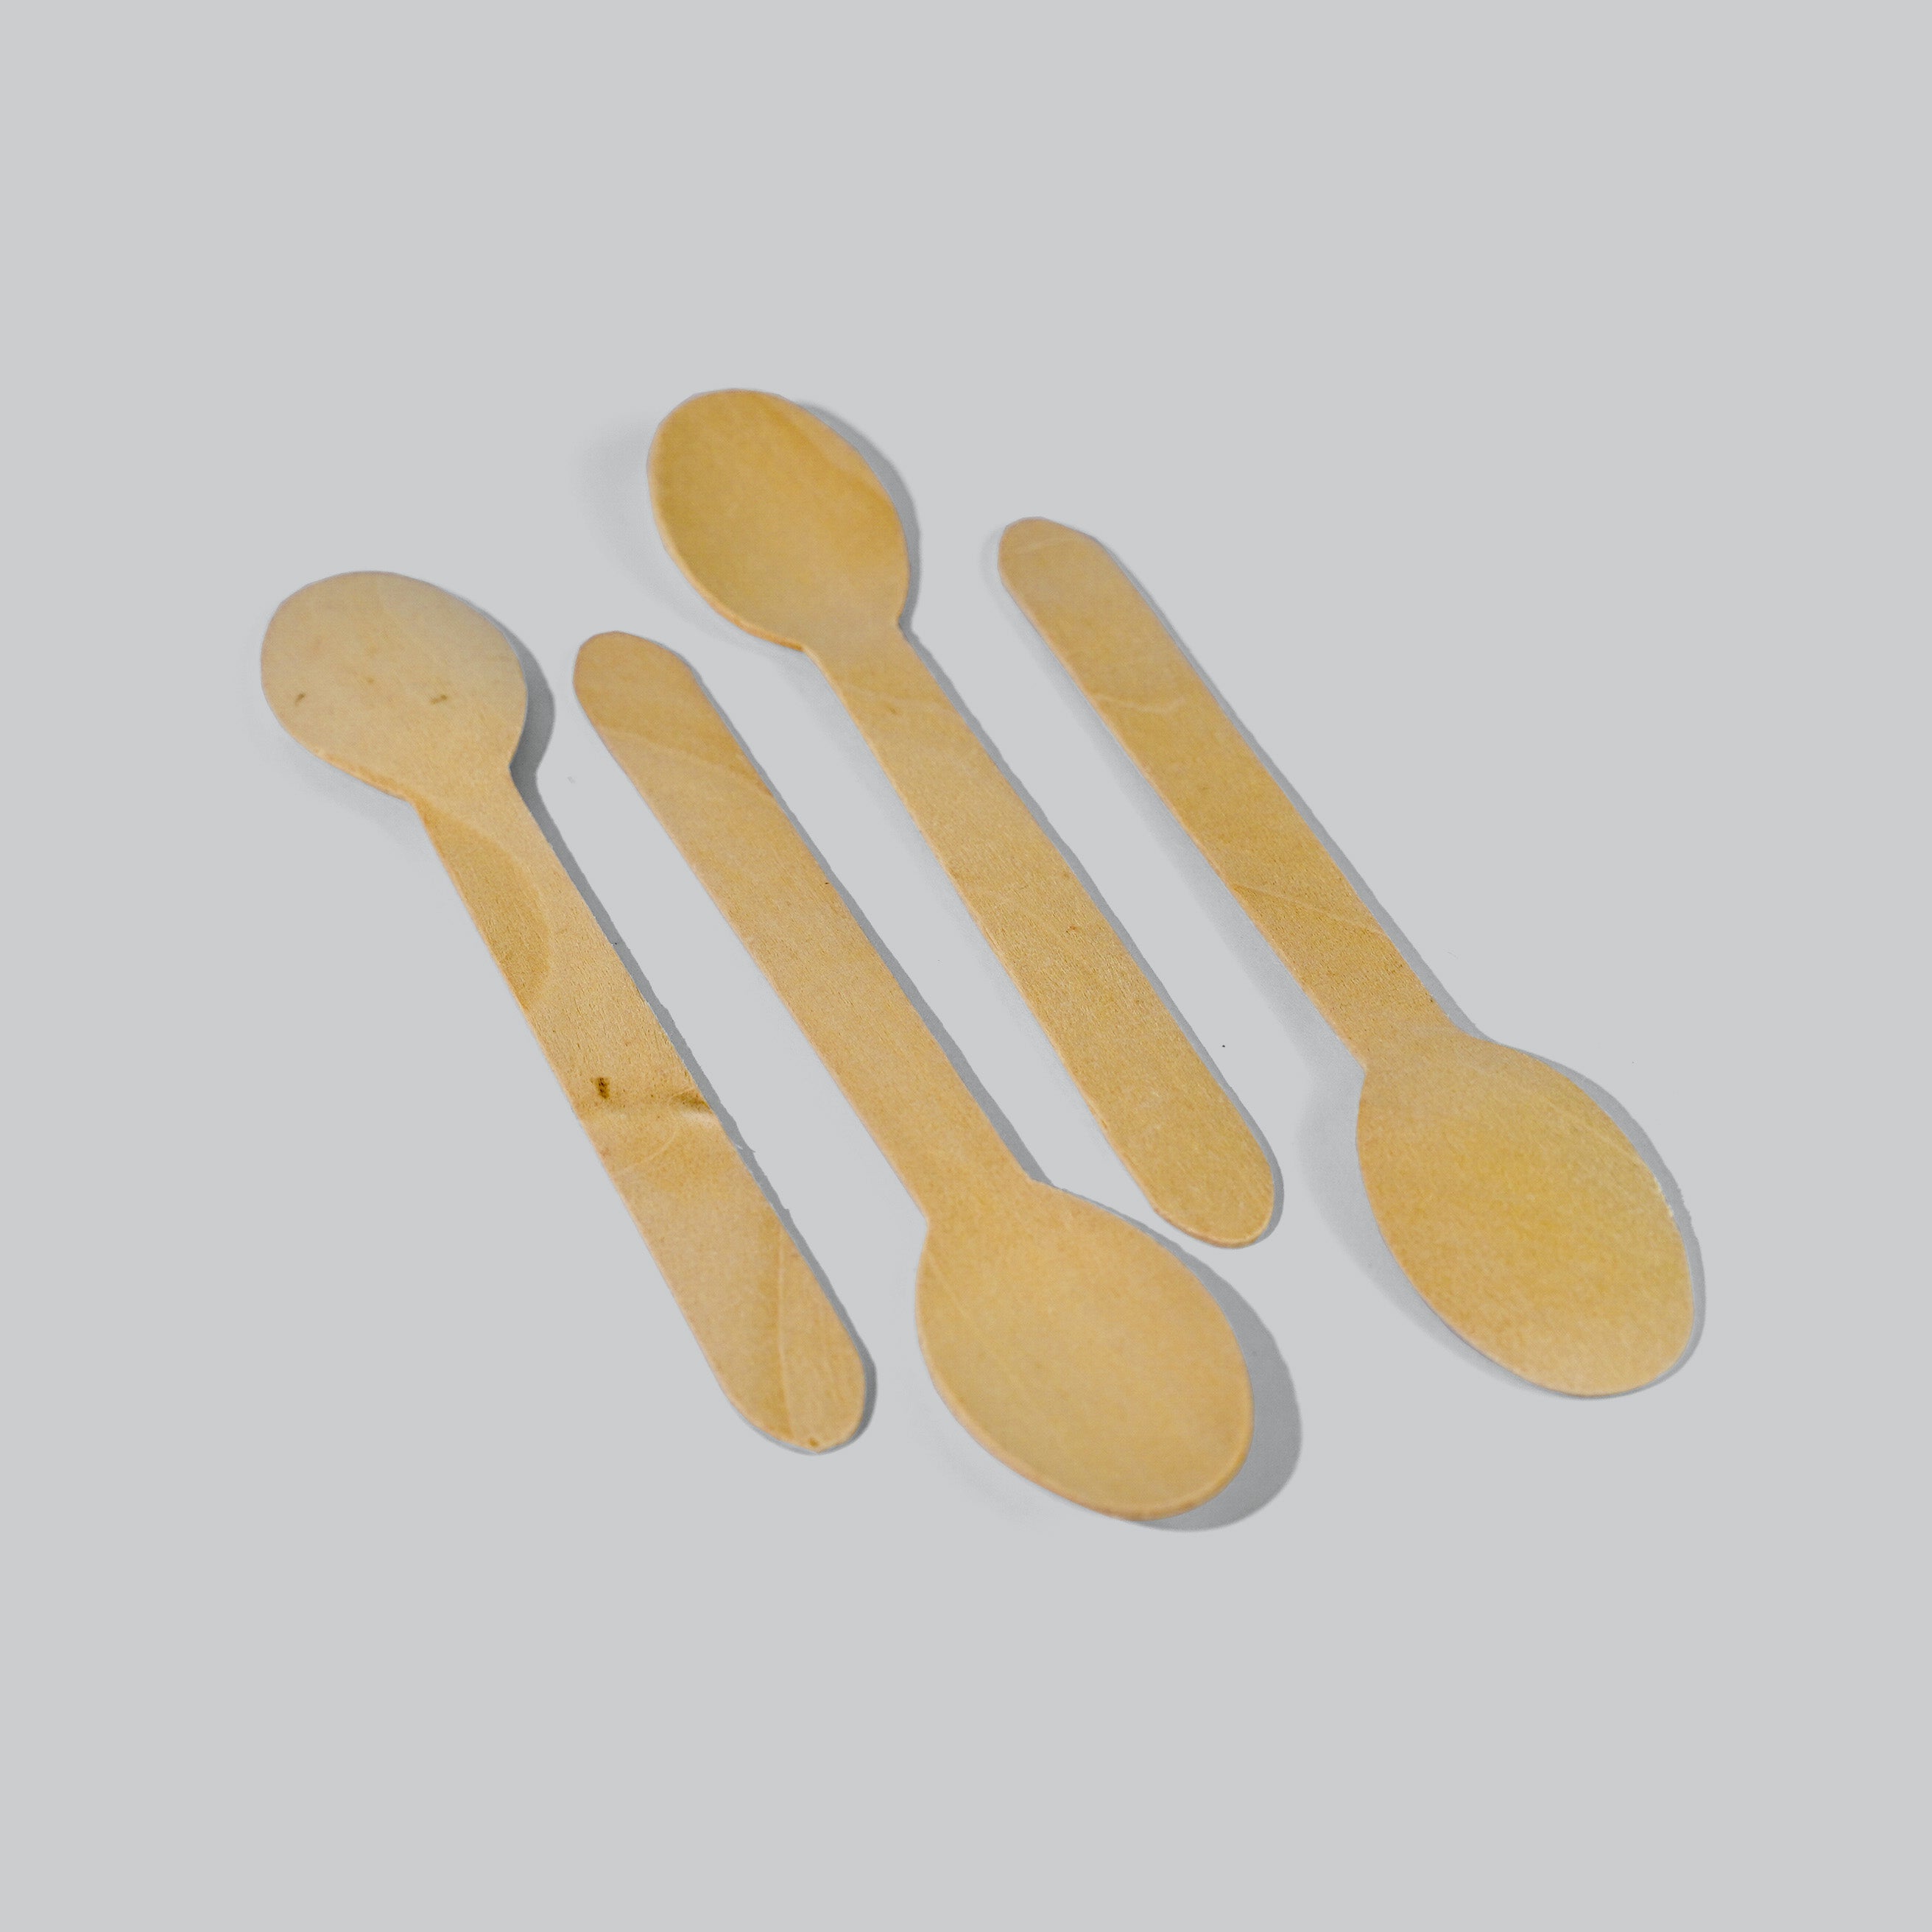 Wooden Spoons - Pack of 15 by EQUO